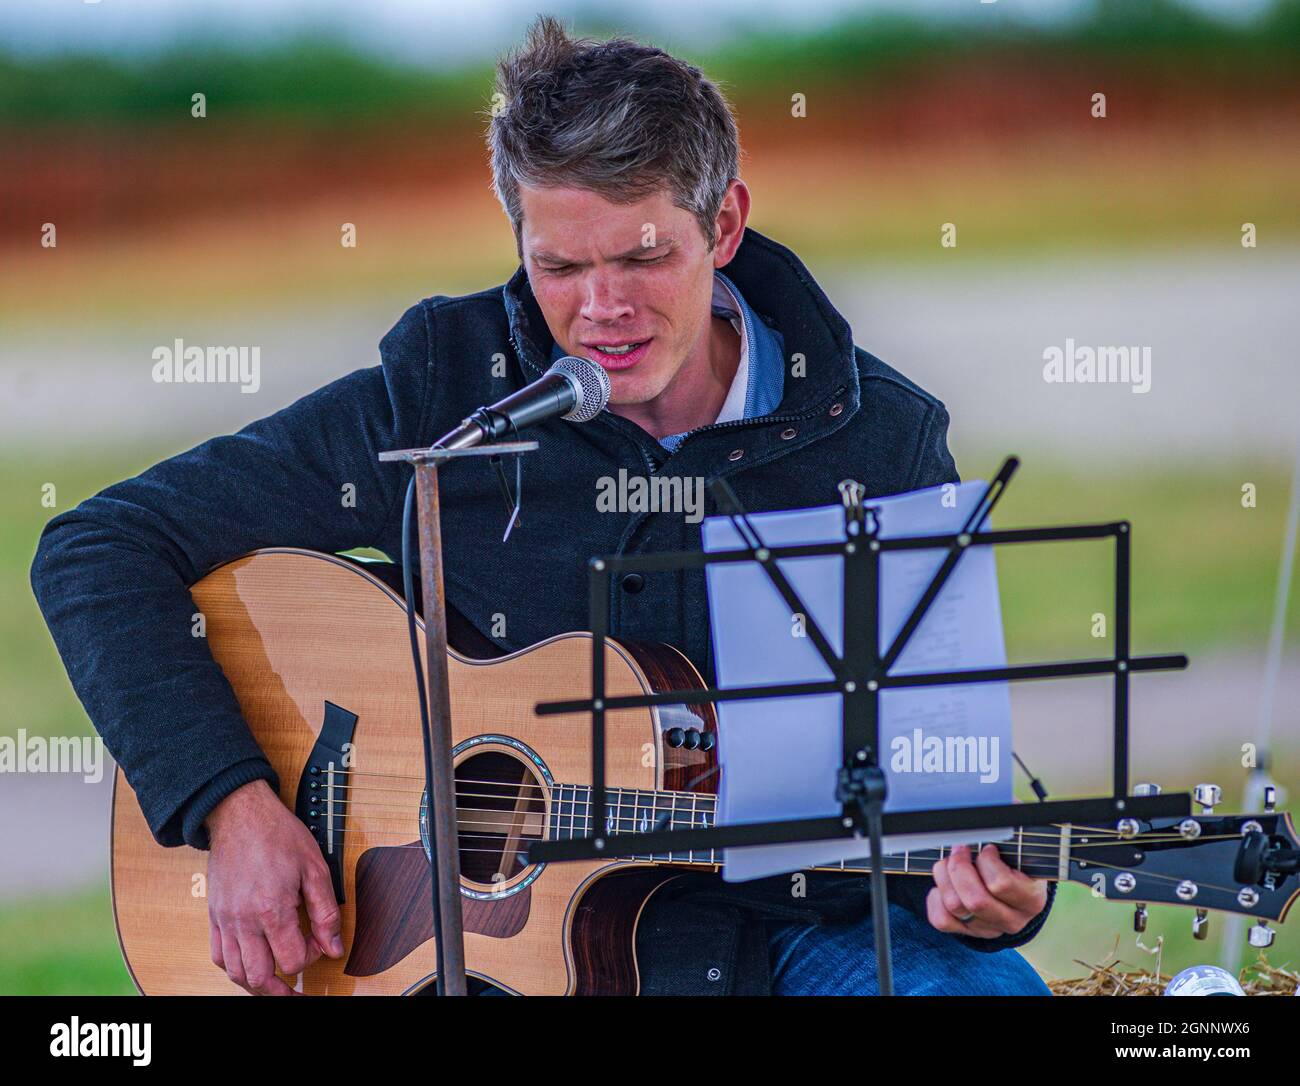 A guitarist and folk singer performing at an outdoor event Stock Photo